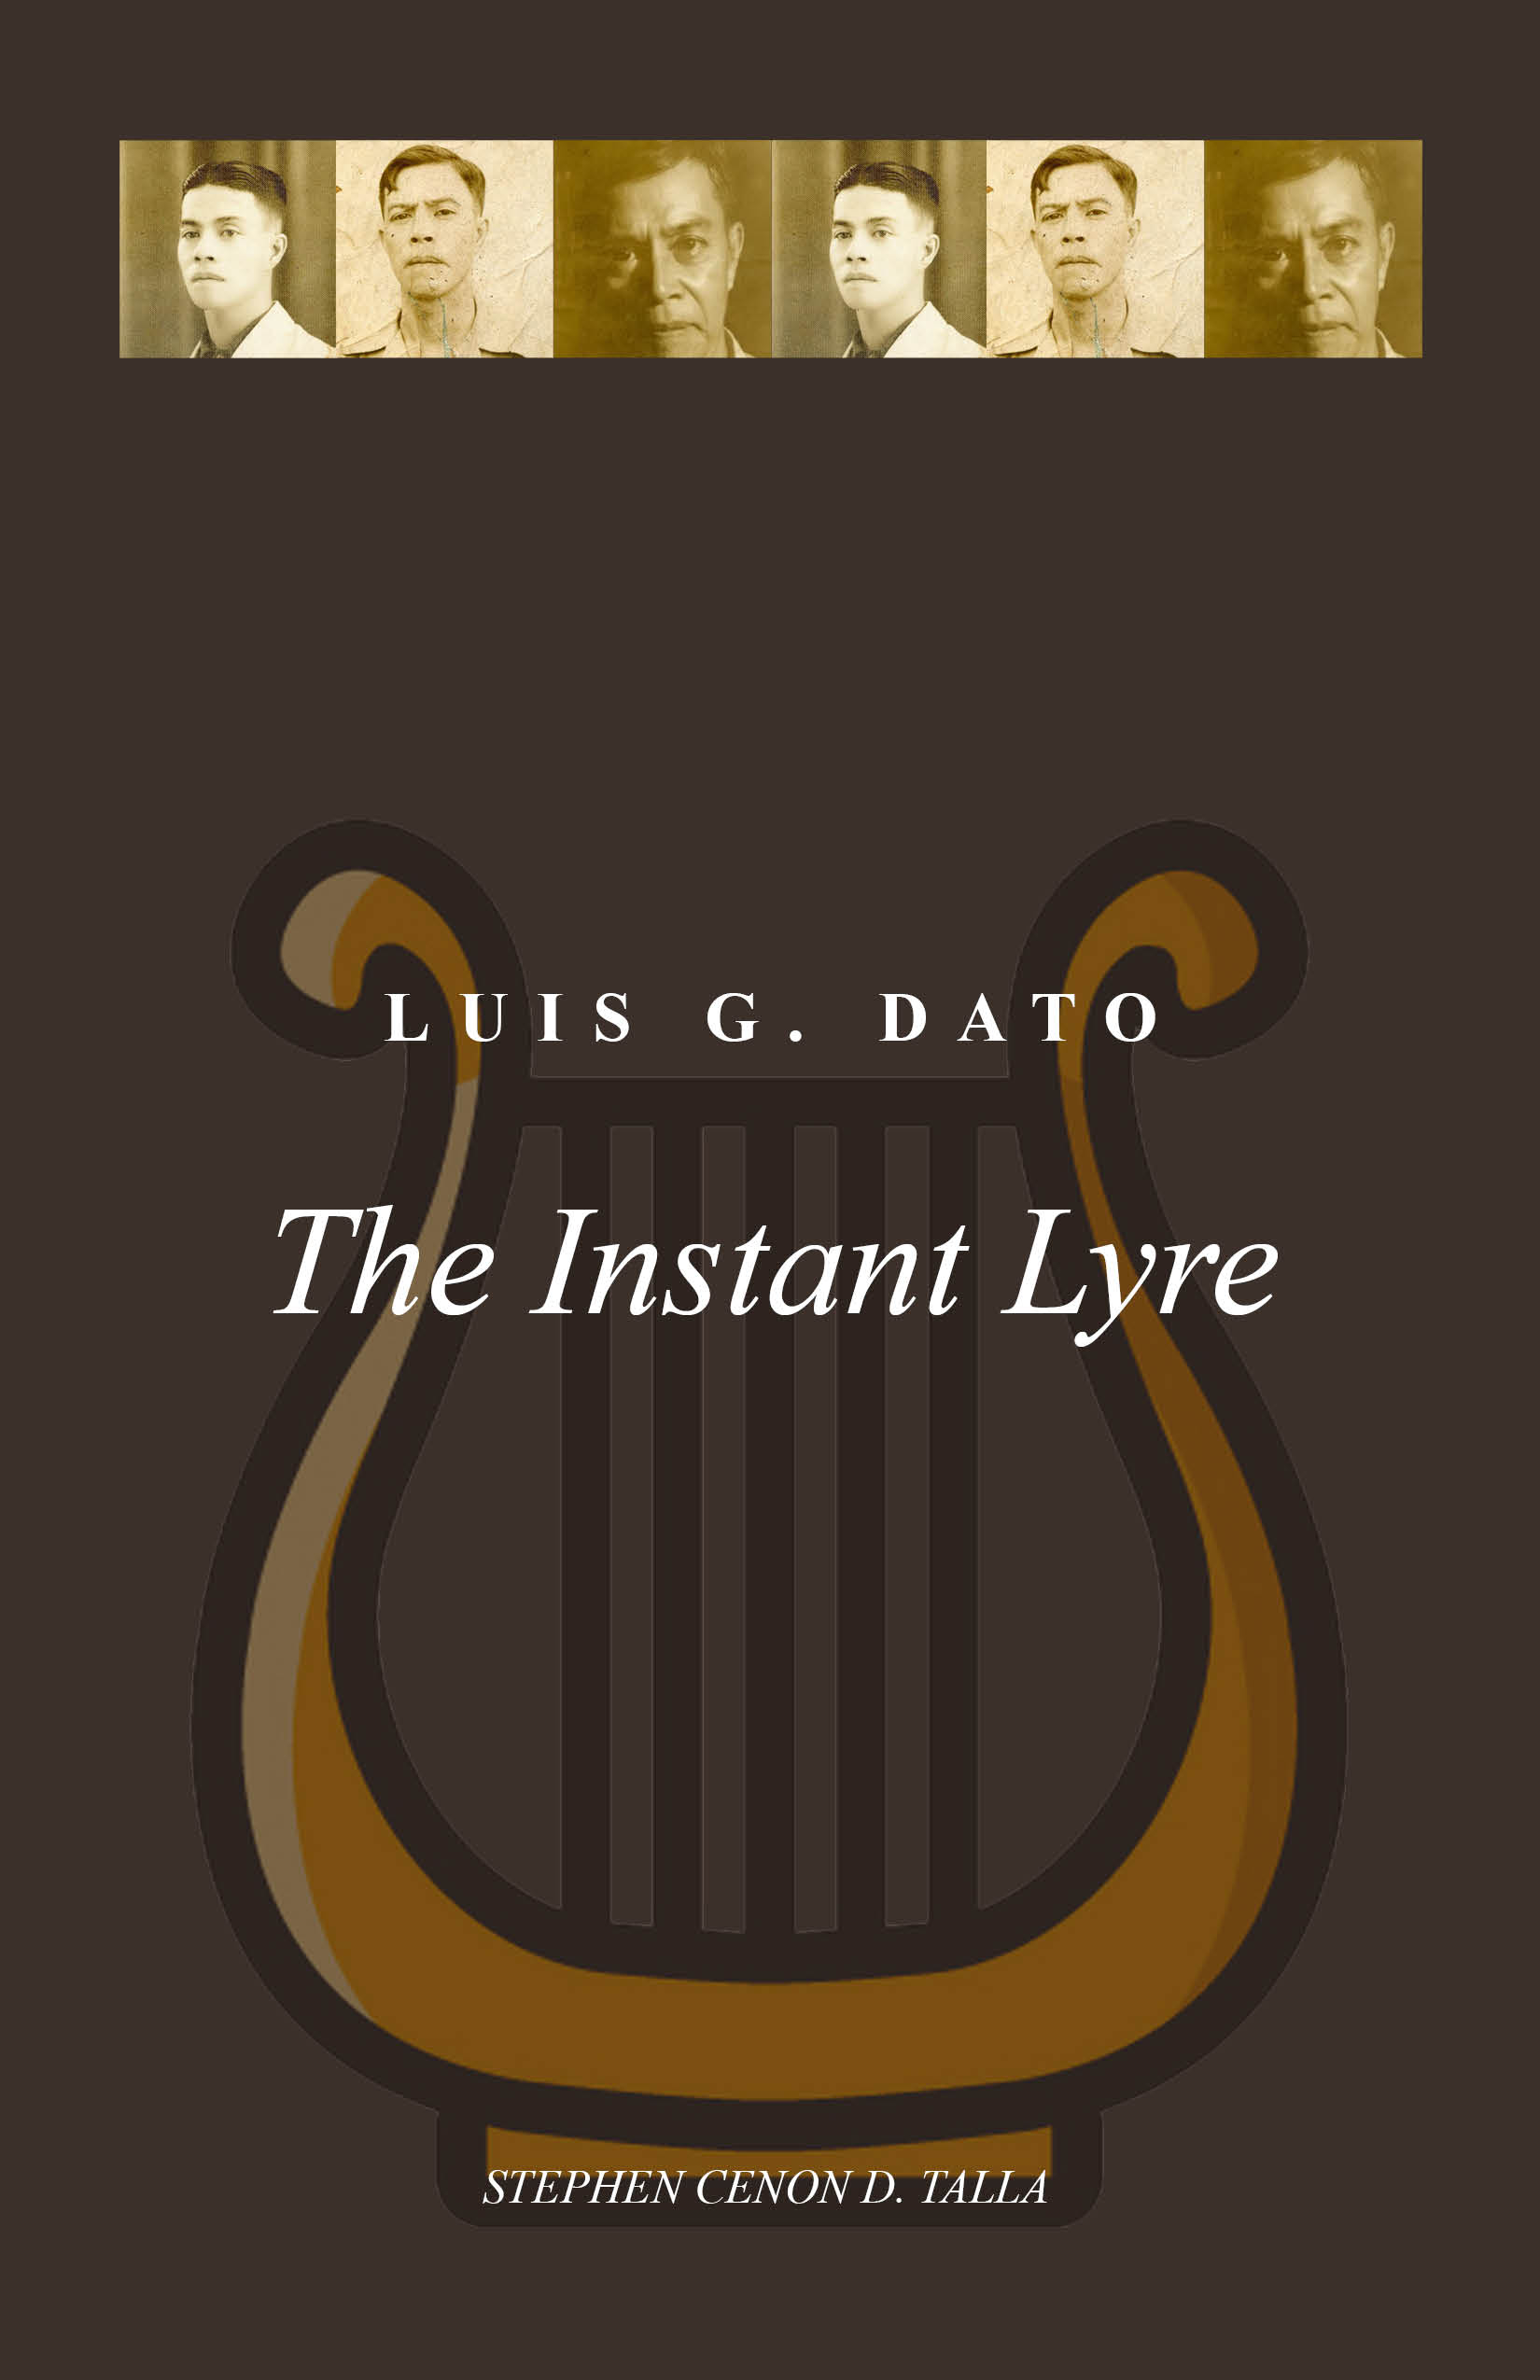 the instant lyre by luis g dato